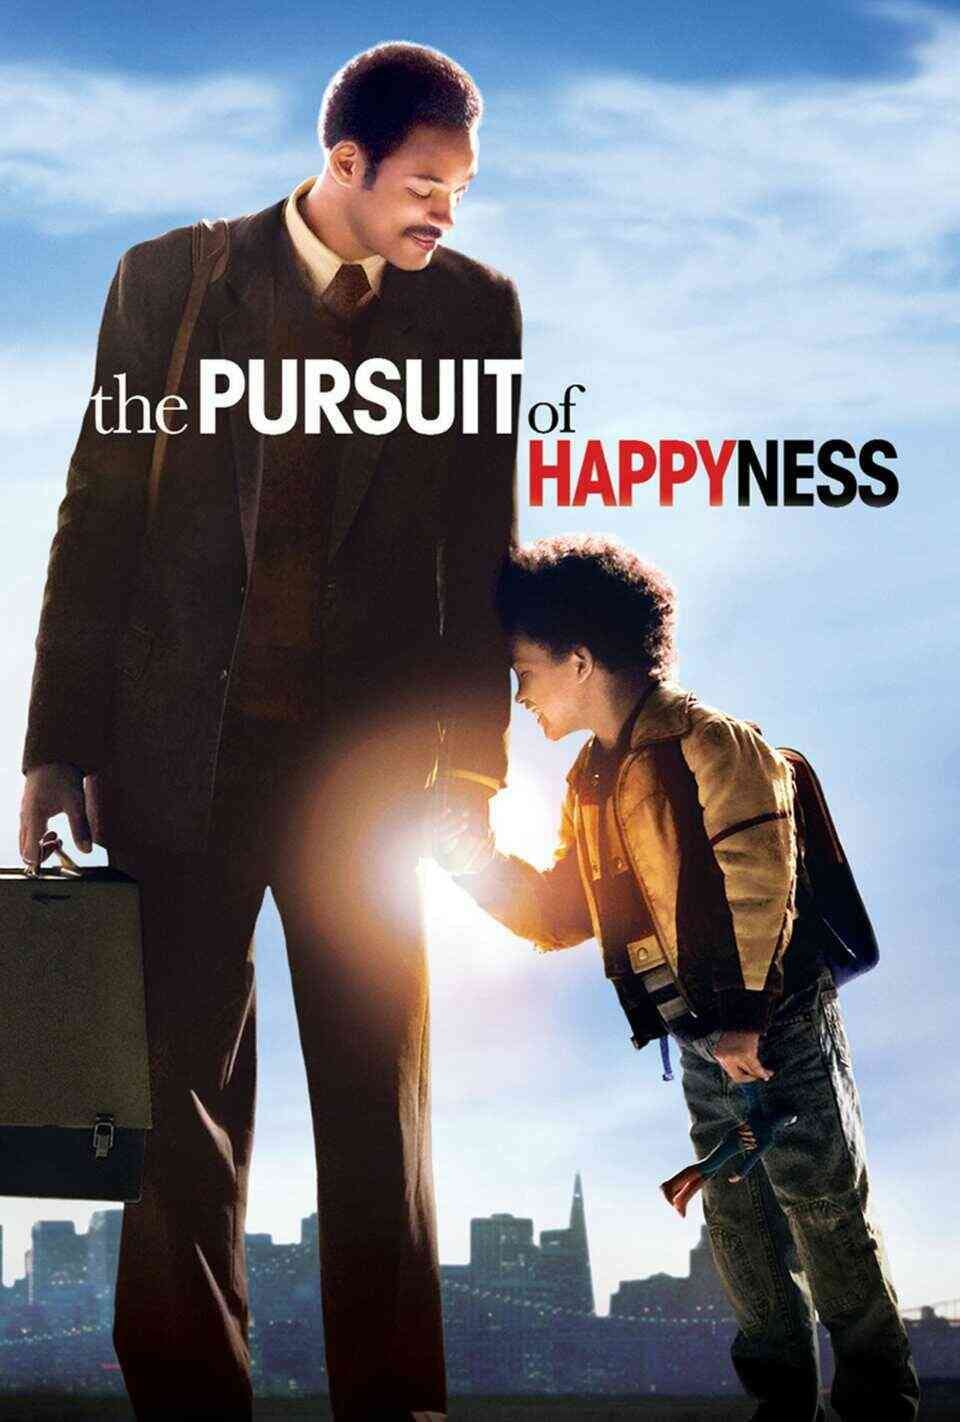 Read The Pursuit of Happyness screenplay (poster)